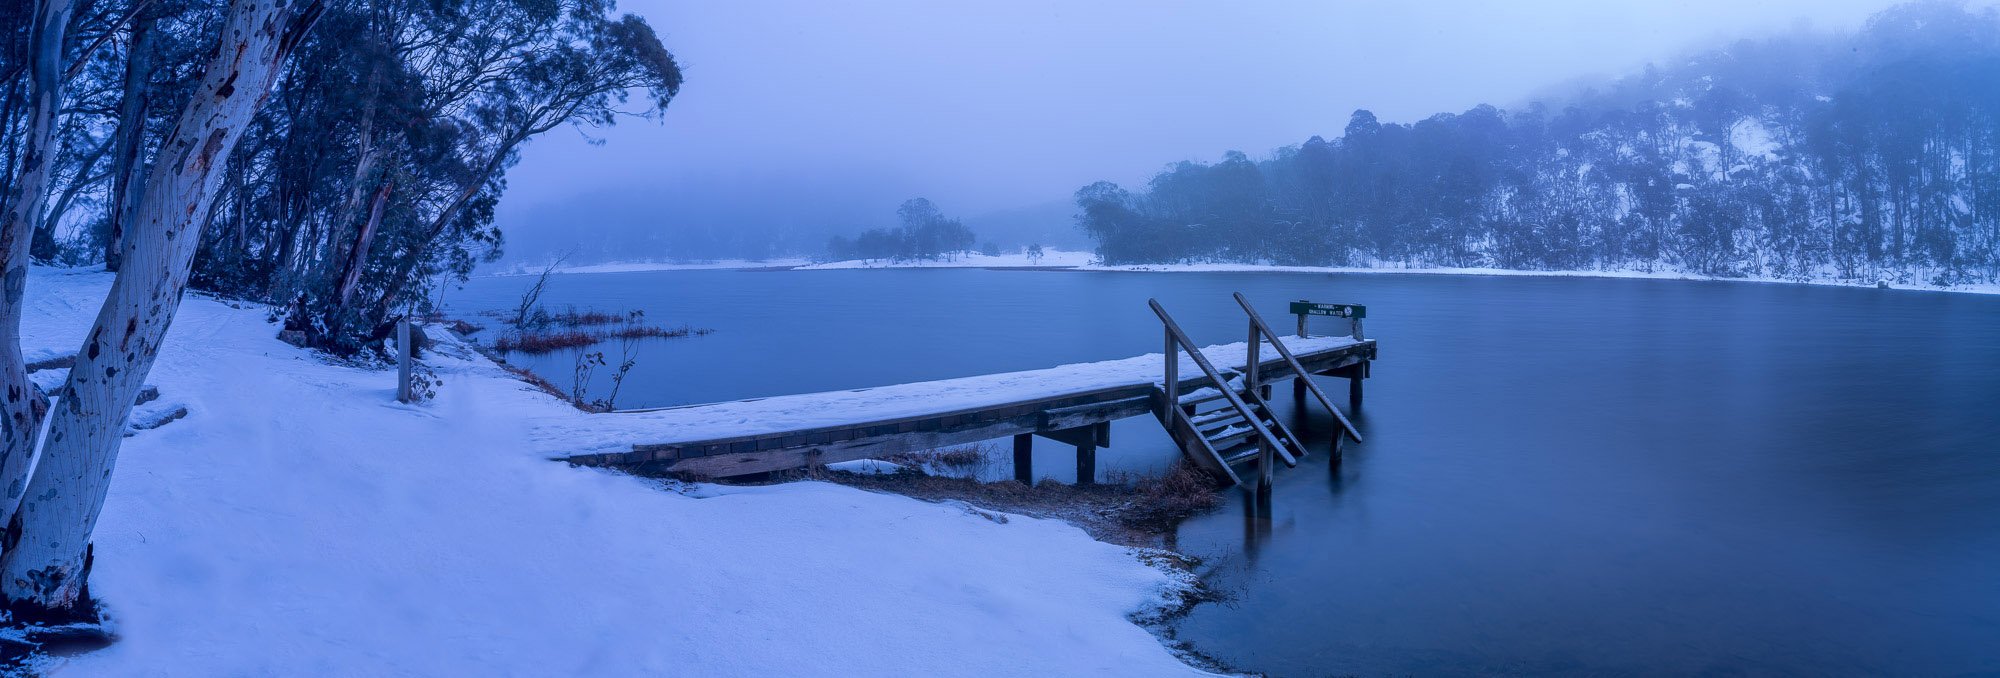 A frozen land with a lake, and a wooden bridge in the water, Lake Catani Mount Buffalo - Victorian High Country